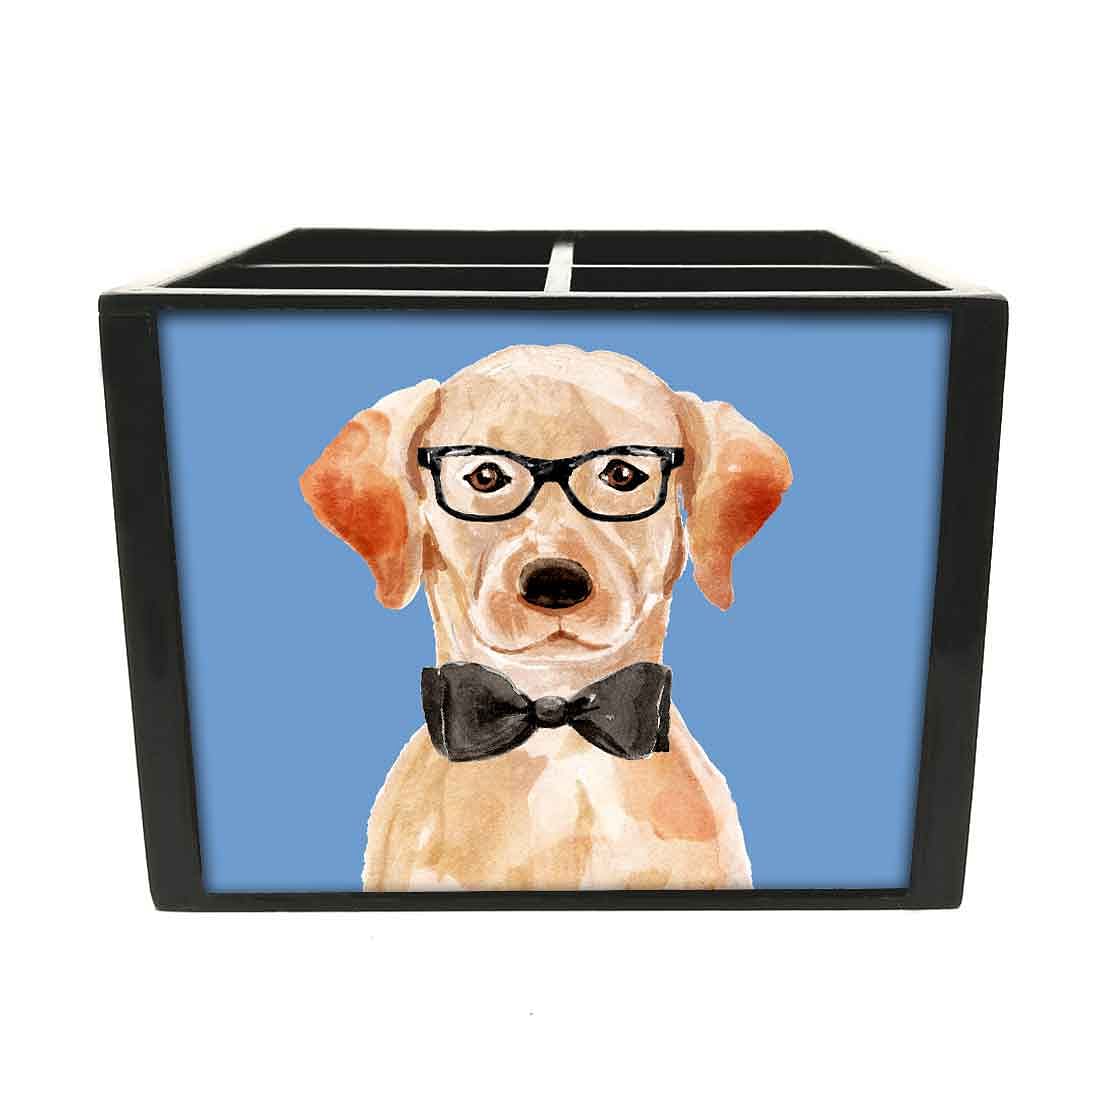 Silverware Cutlery Stand Holder -  Hipster Pitbull Nutcase